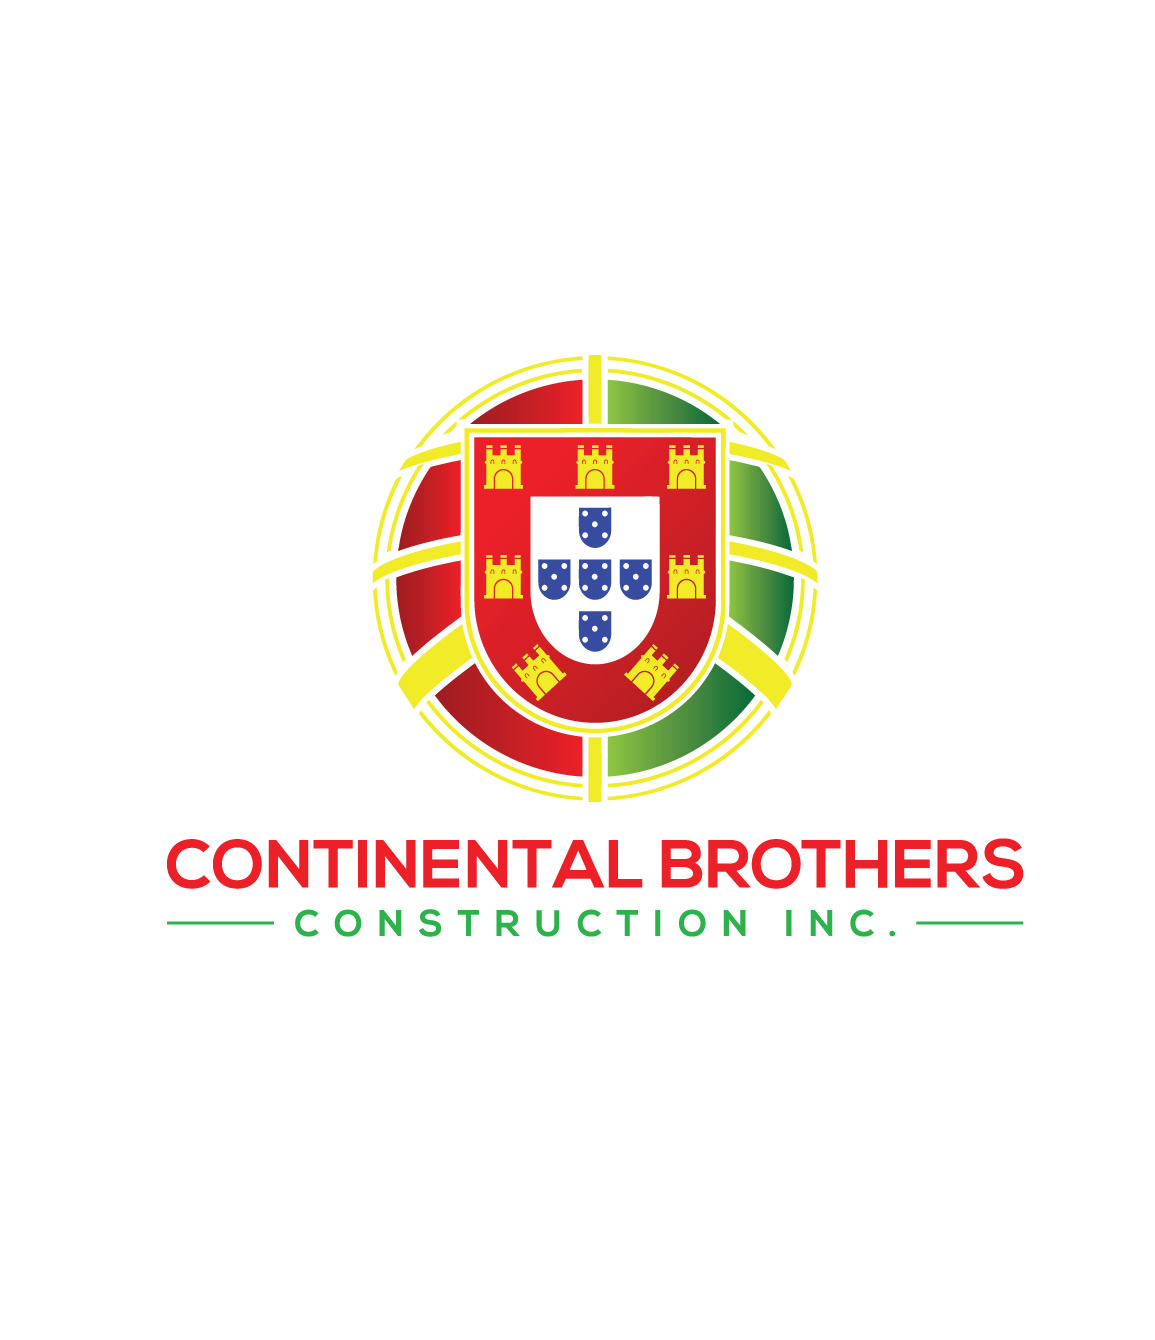 Continental Brothers Construction Inc.'s logo